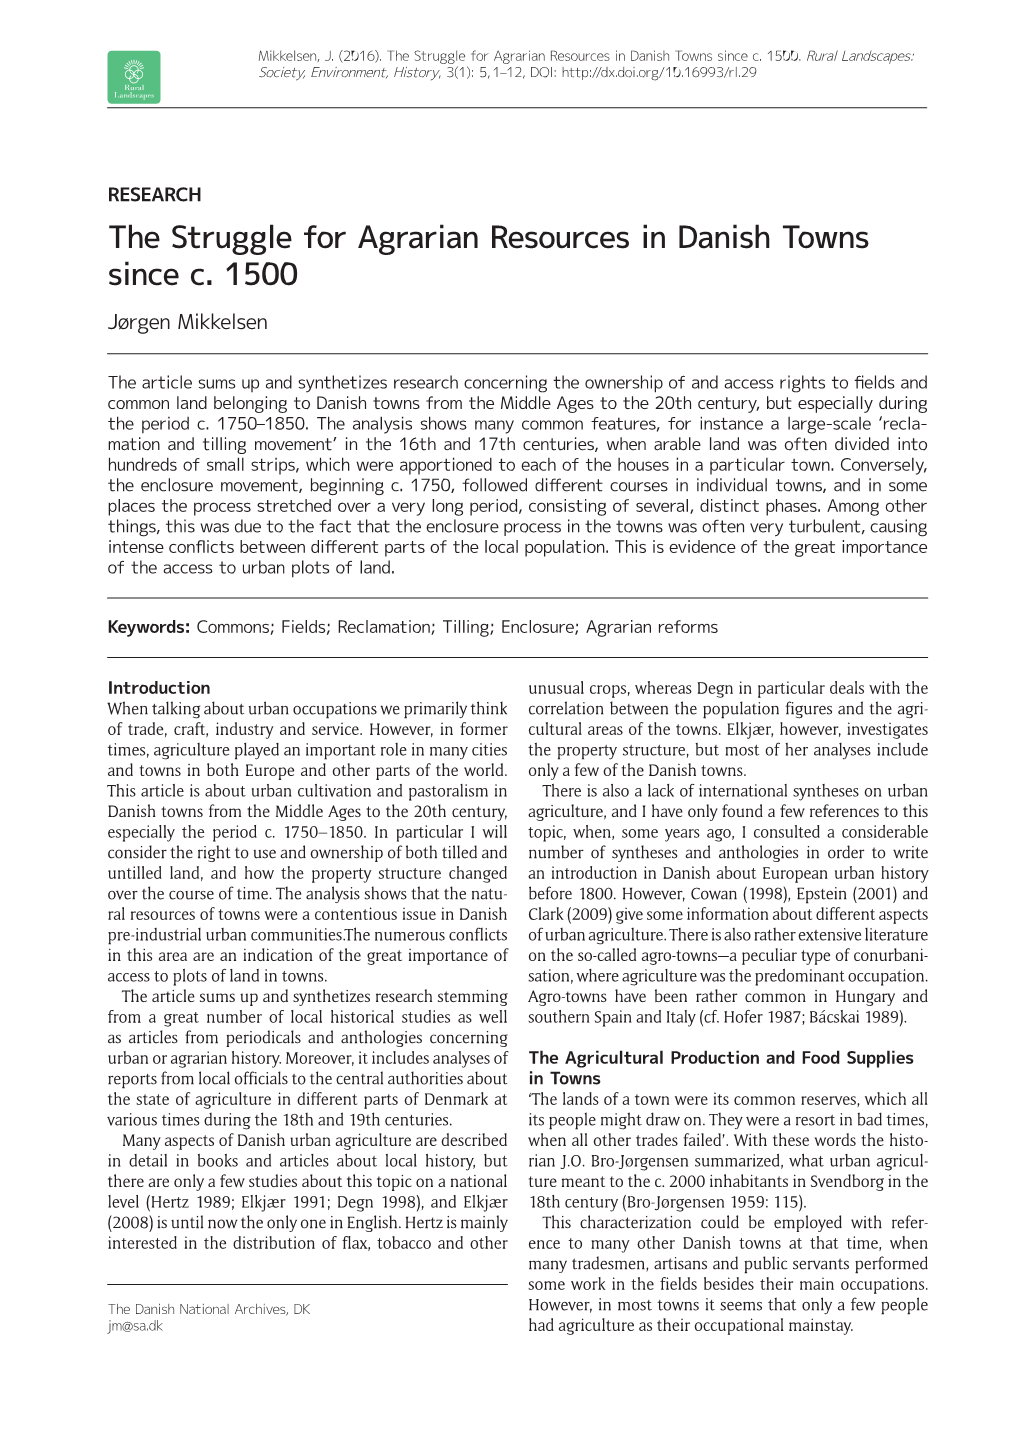 The Struggle for Agrarian Resources in Danish Towns Since C. 1500